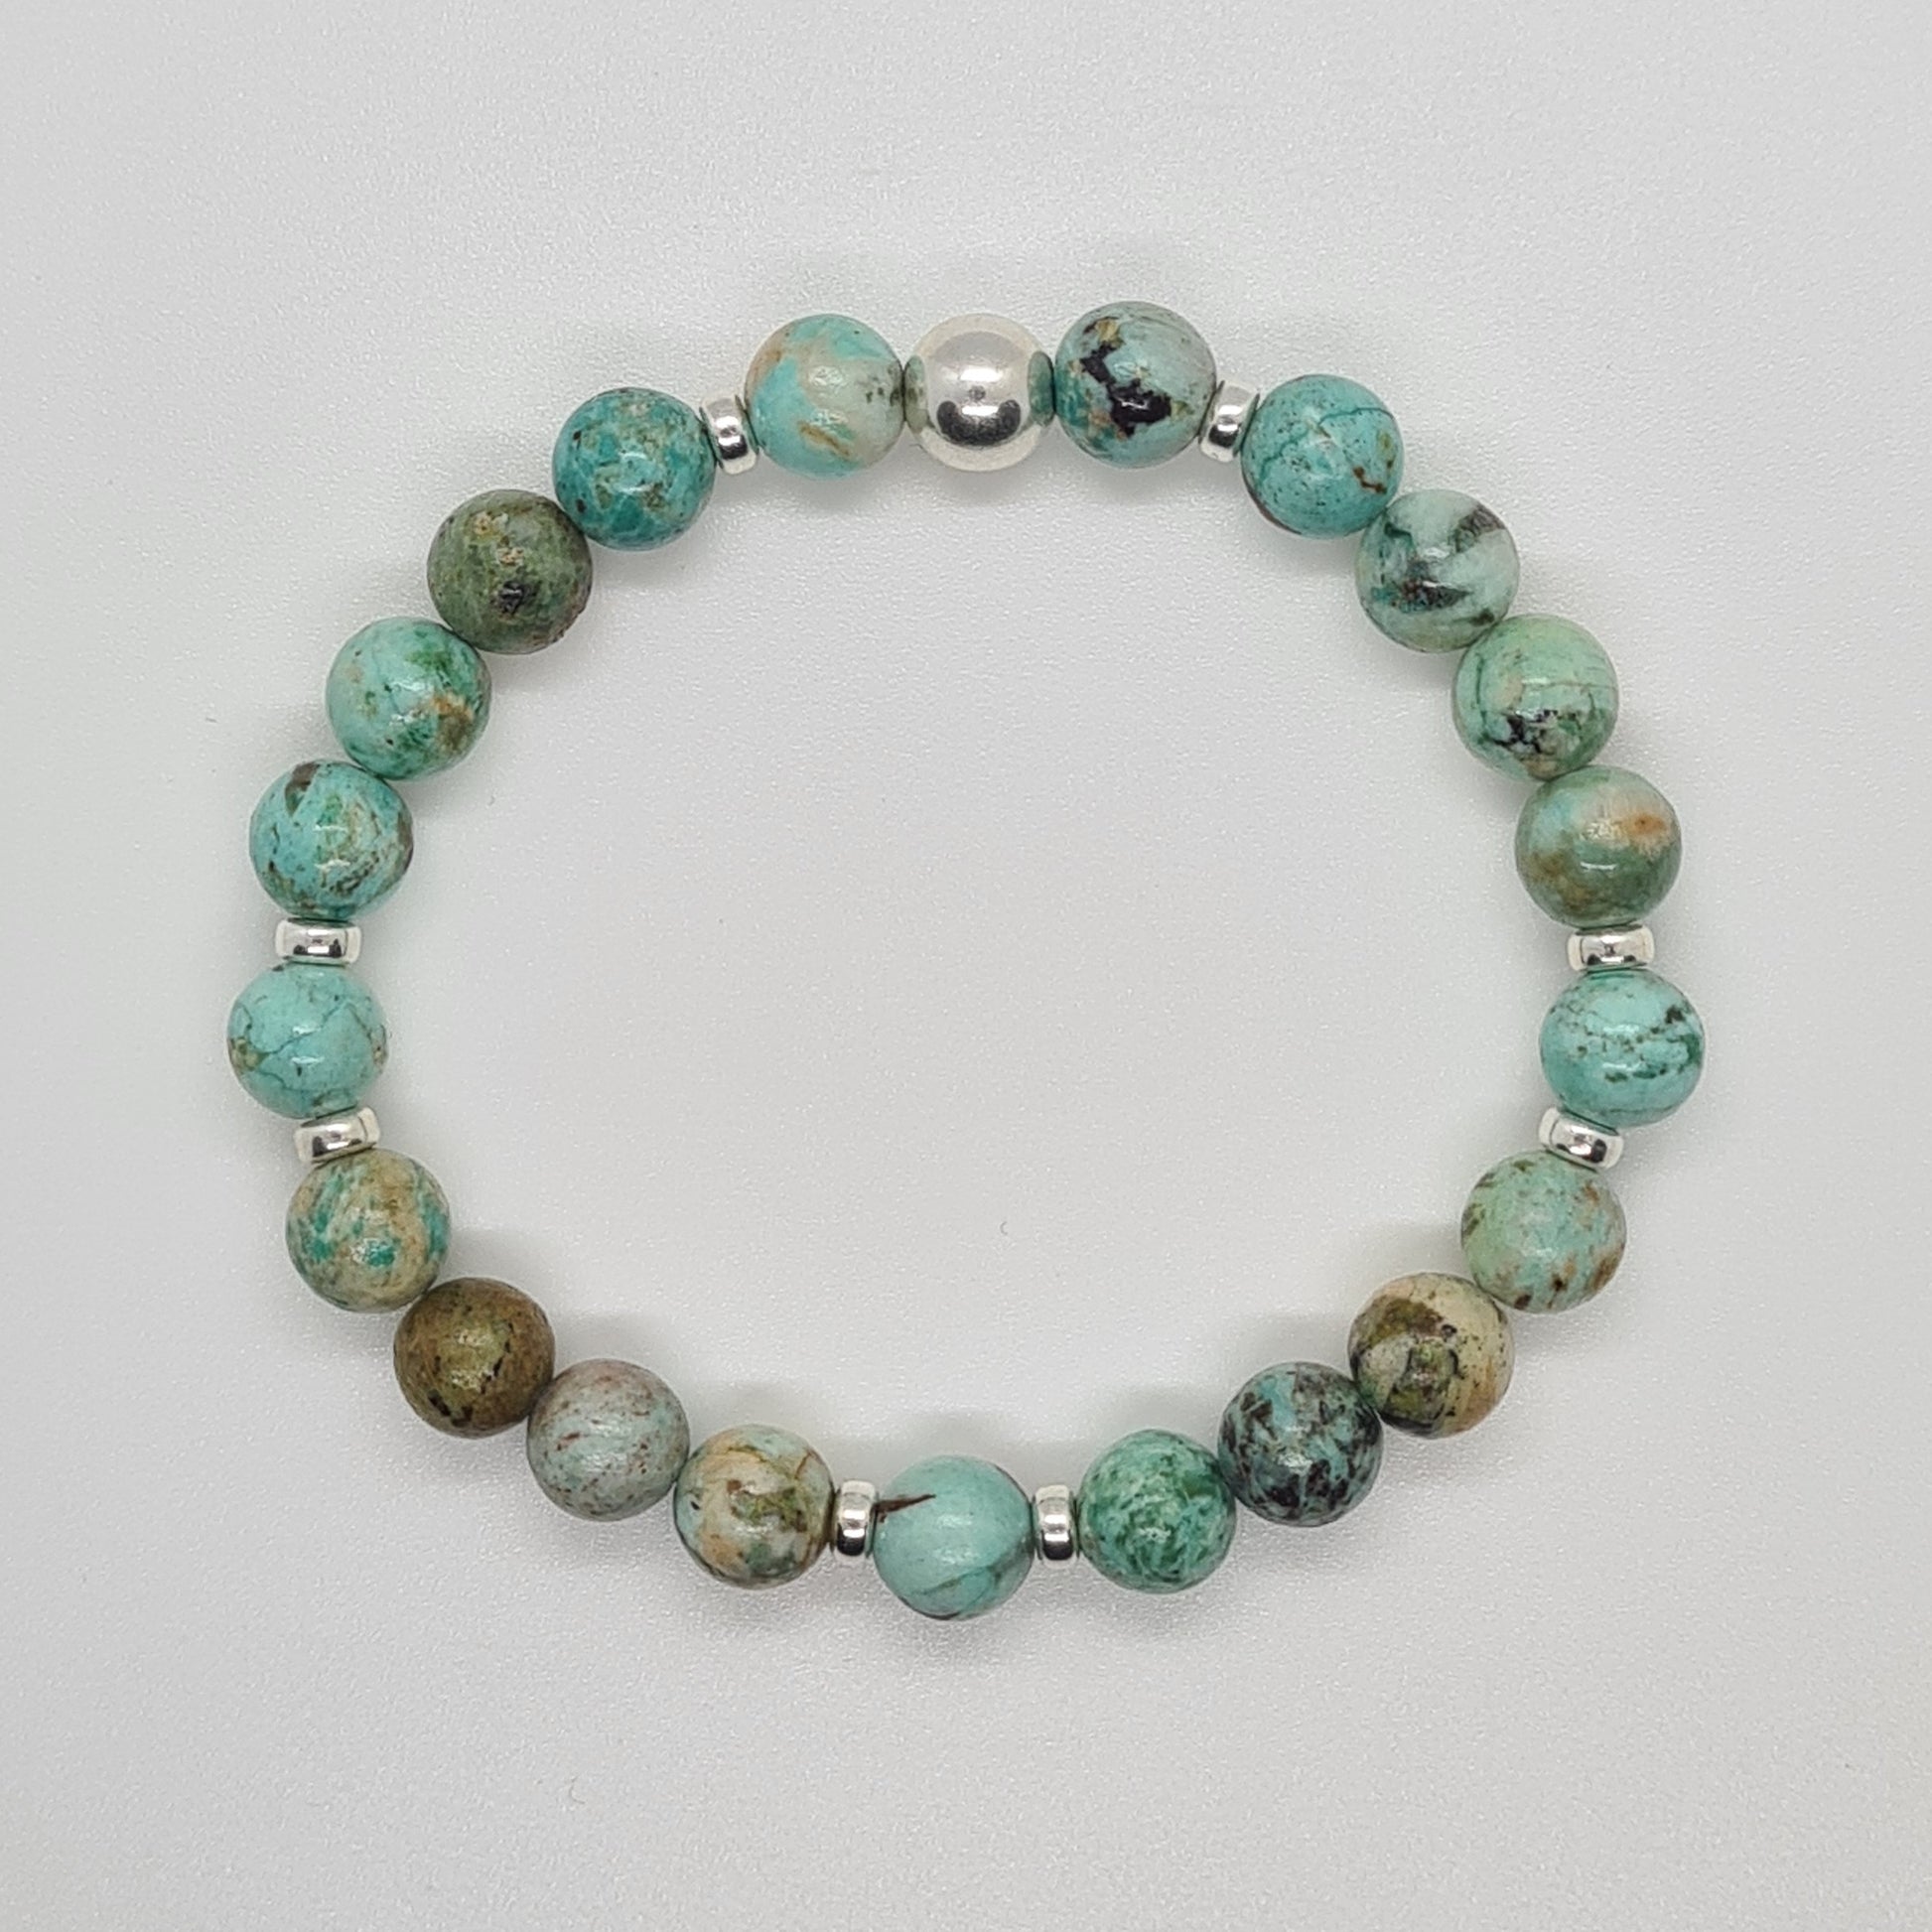 A chrysocolla gemstone bracelet in 8mm beads with silver accessories from above